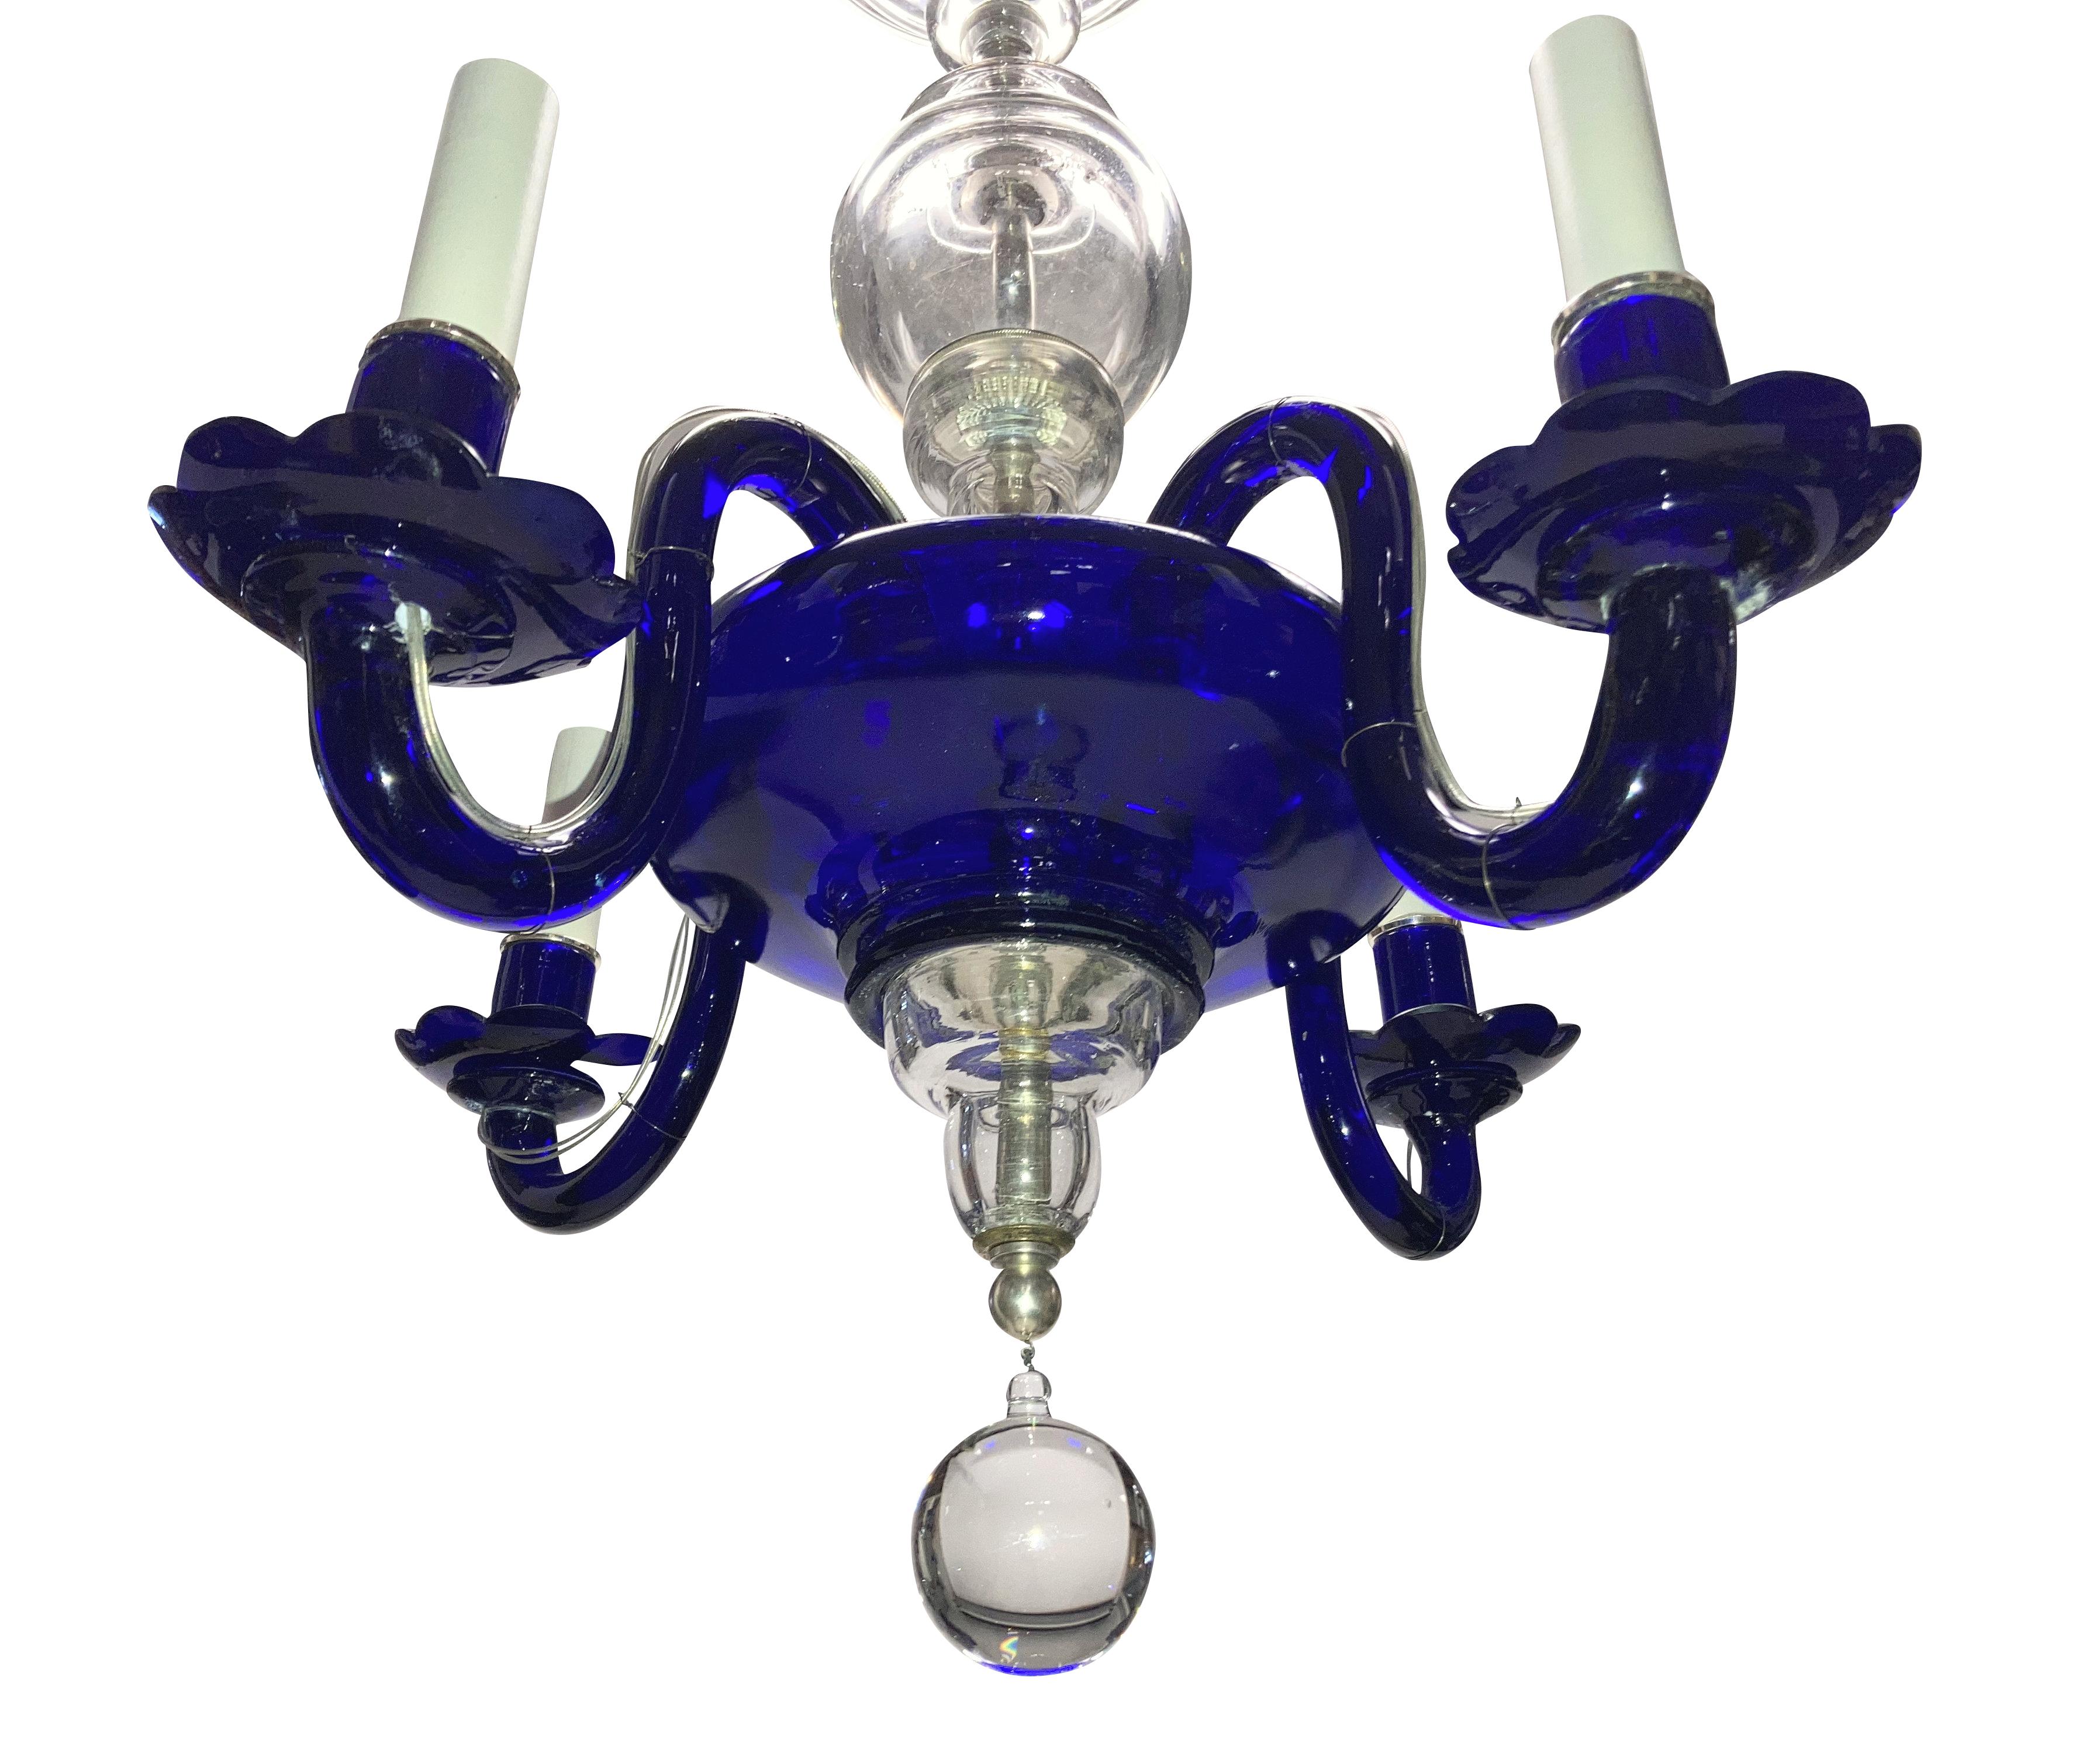 An Italian Venetian chandelier of four arms, in both cobalt and clear hand blown glass.